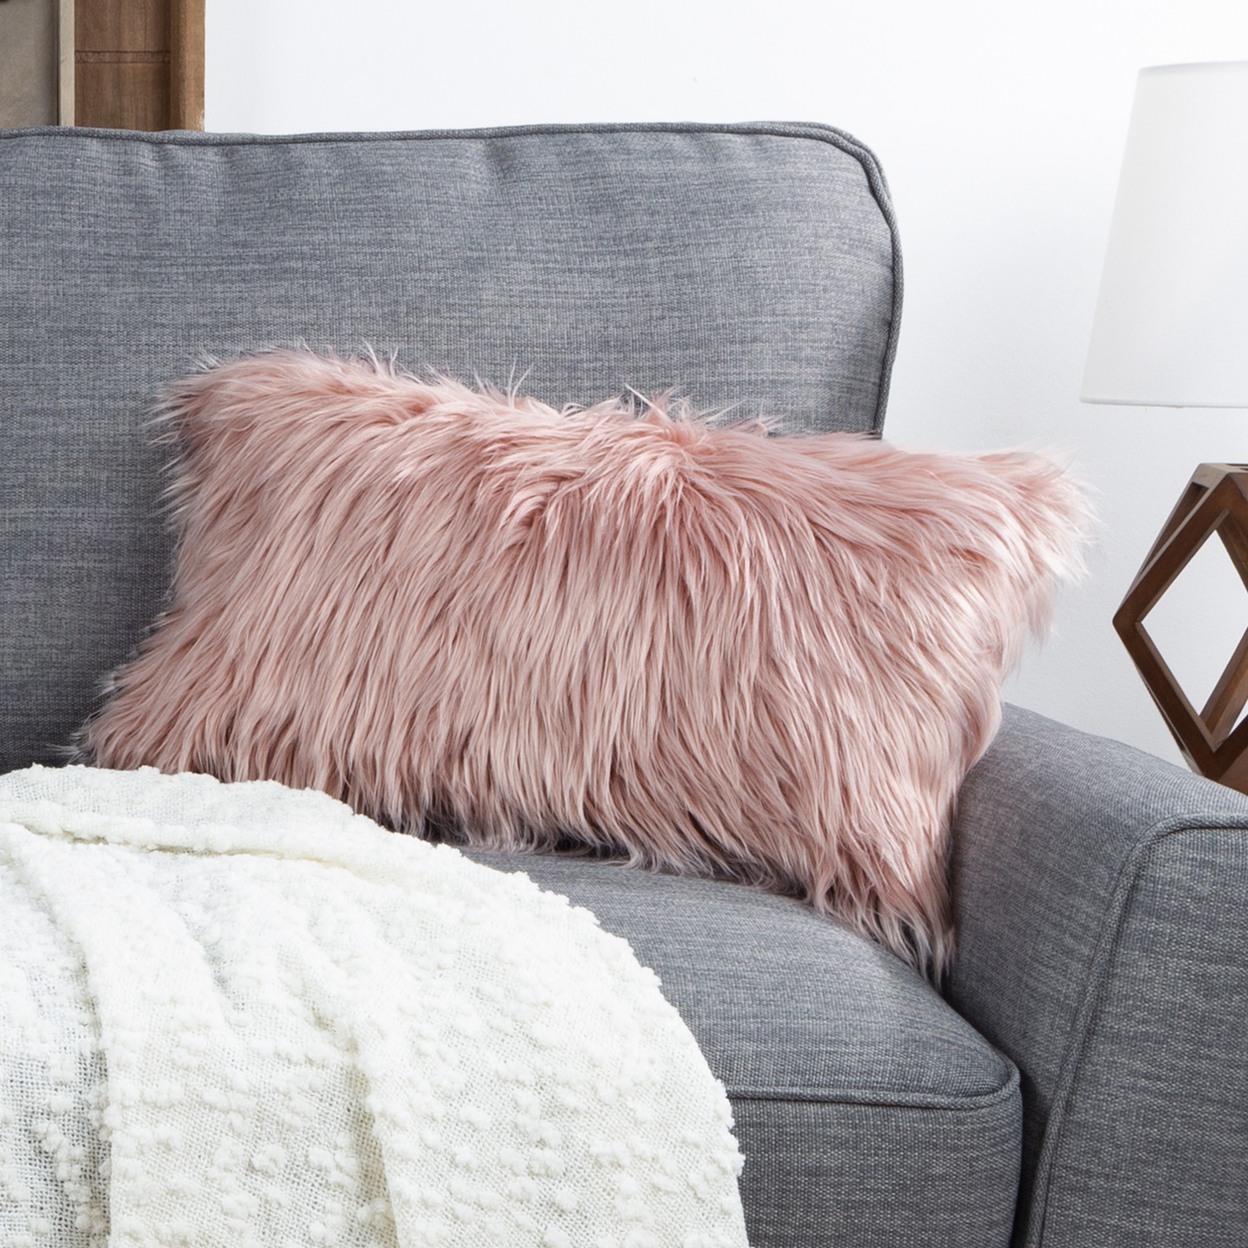 20 X 12 In Himalayan Faux Fur Rectangle Throw Accent Pillow Removable Cover - Pink